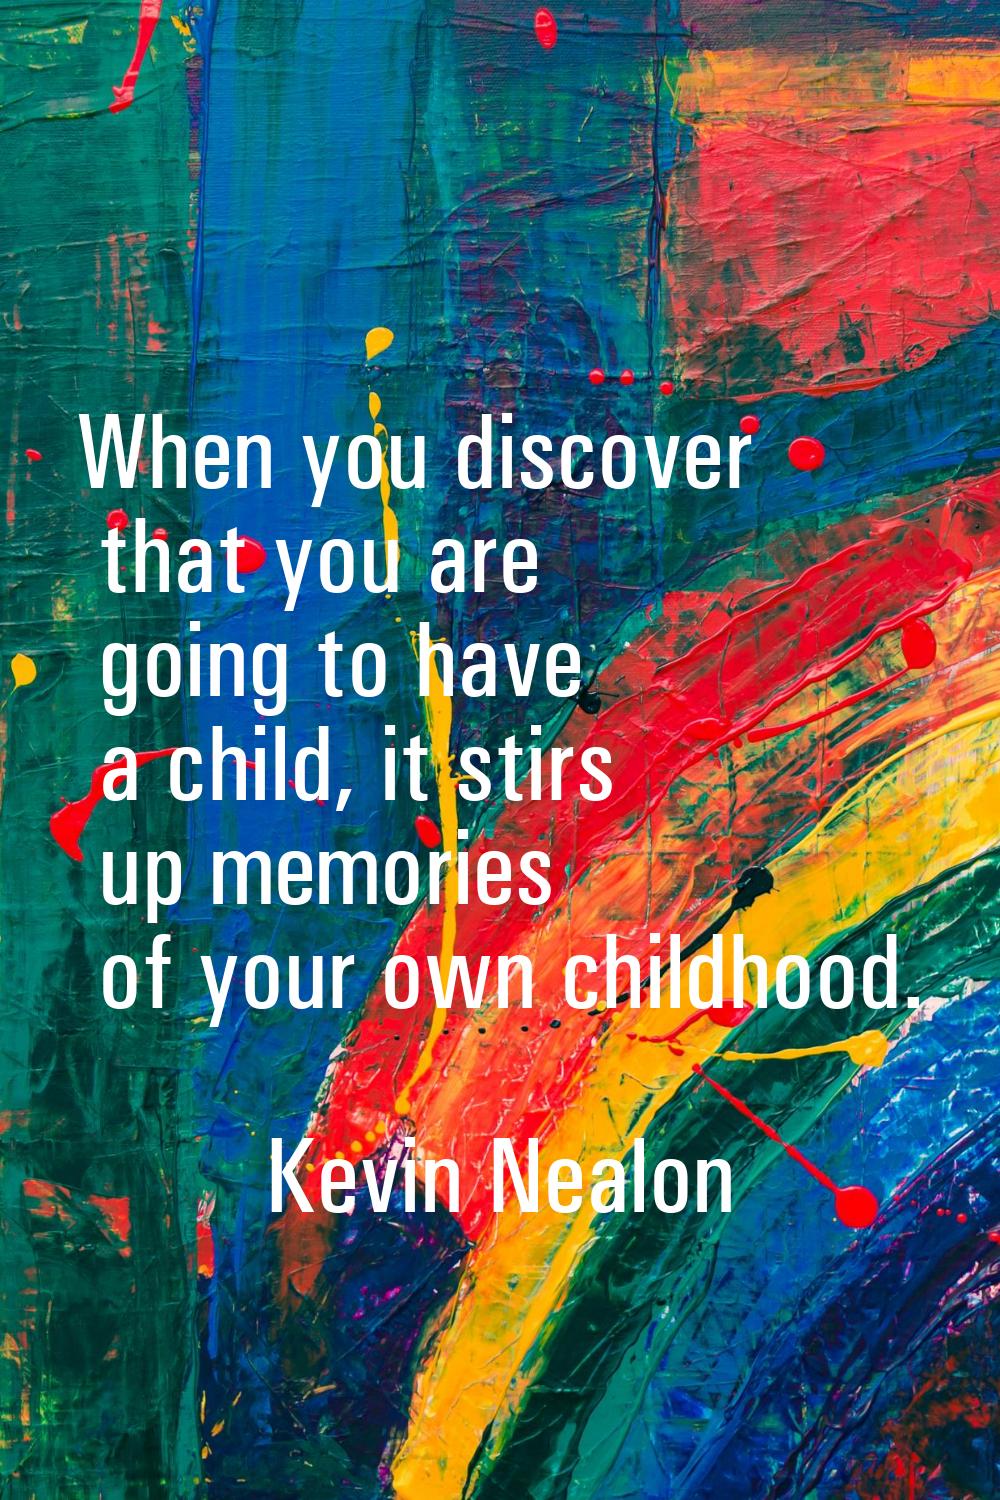 When you discover that you are going to have a child, it stirs up memories of your own childhood.